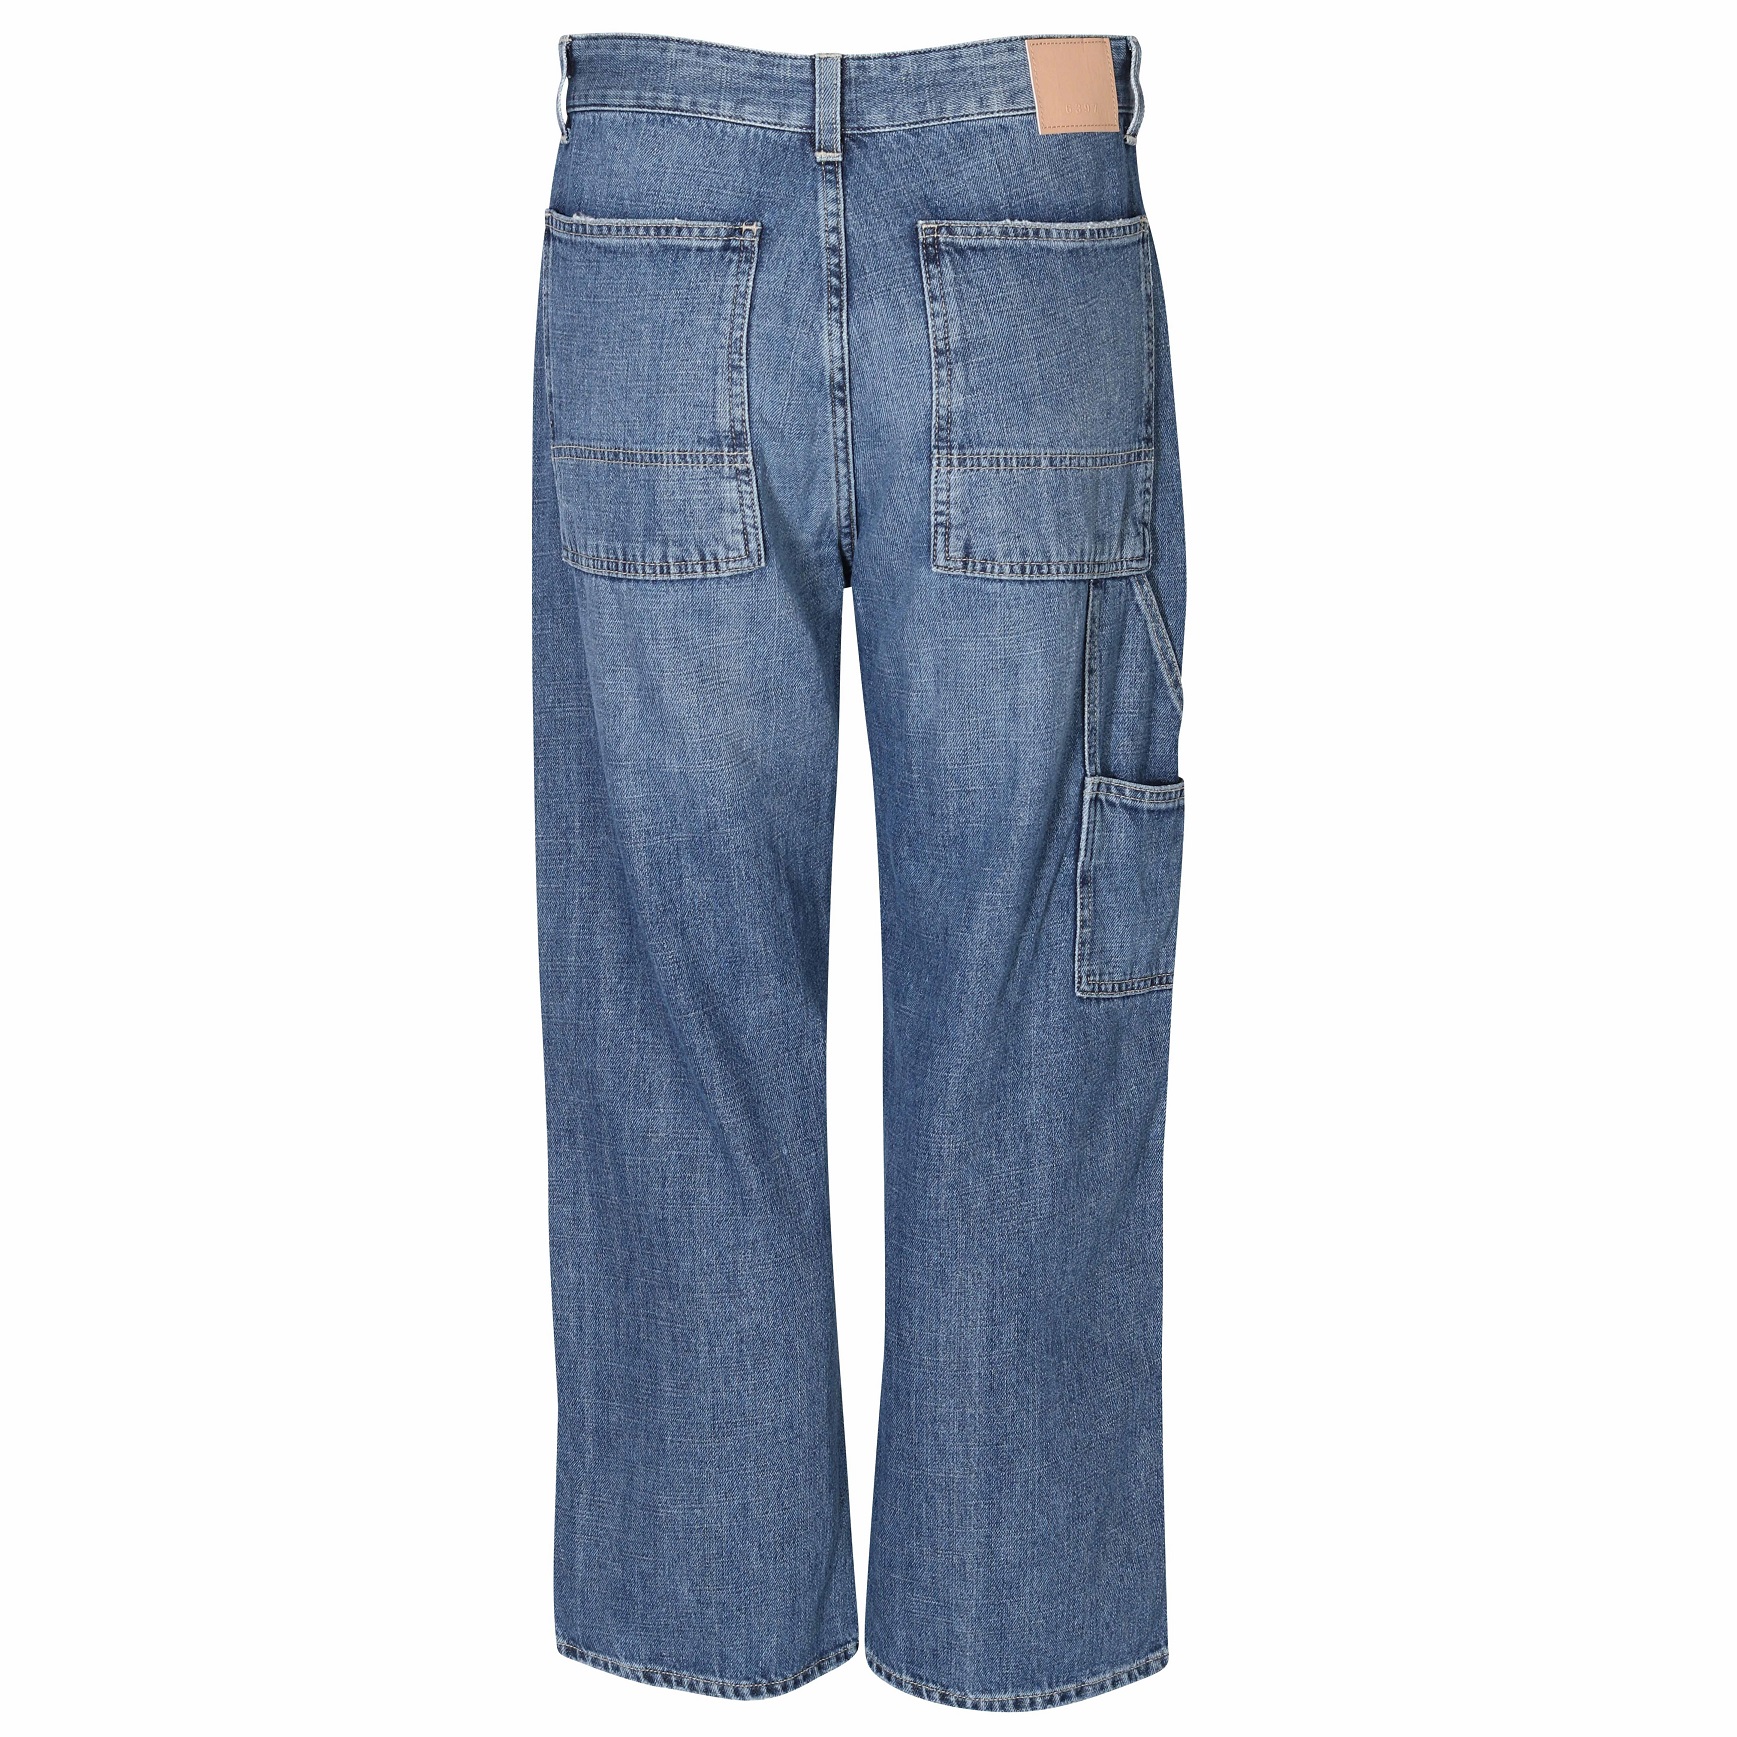 6397 The Painter Jeans in Worn Blue 26